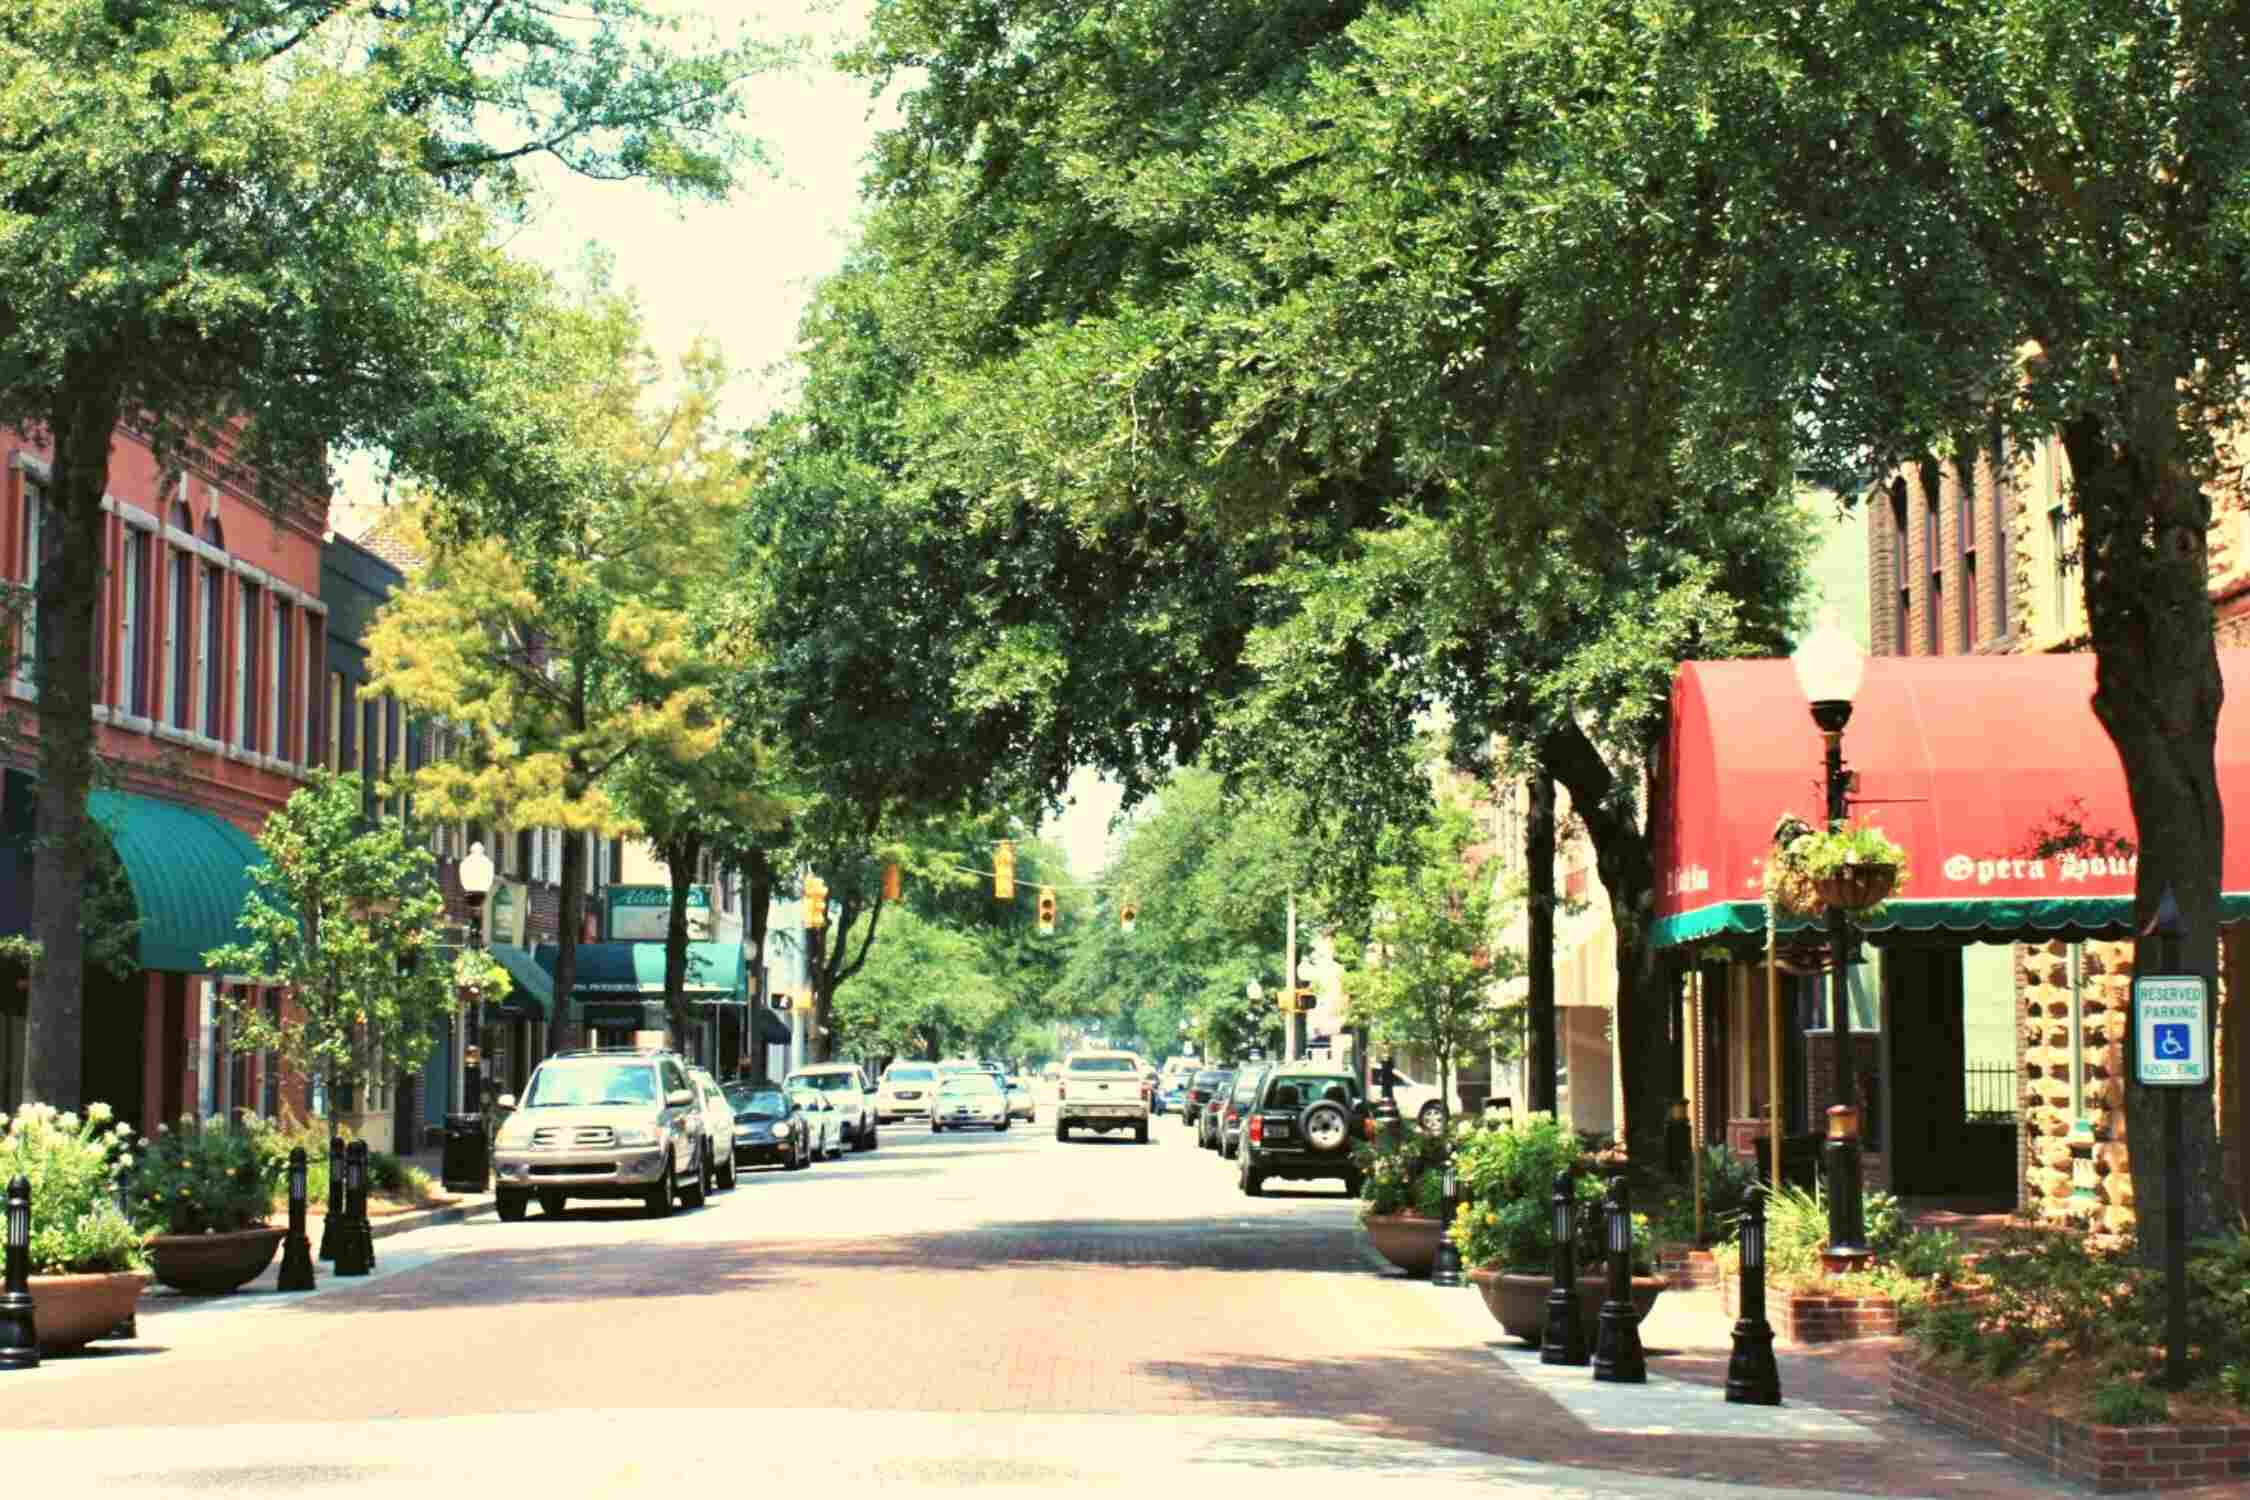 Downtown District of Sumter